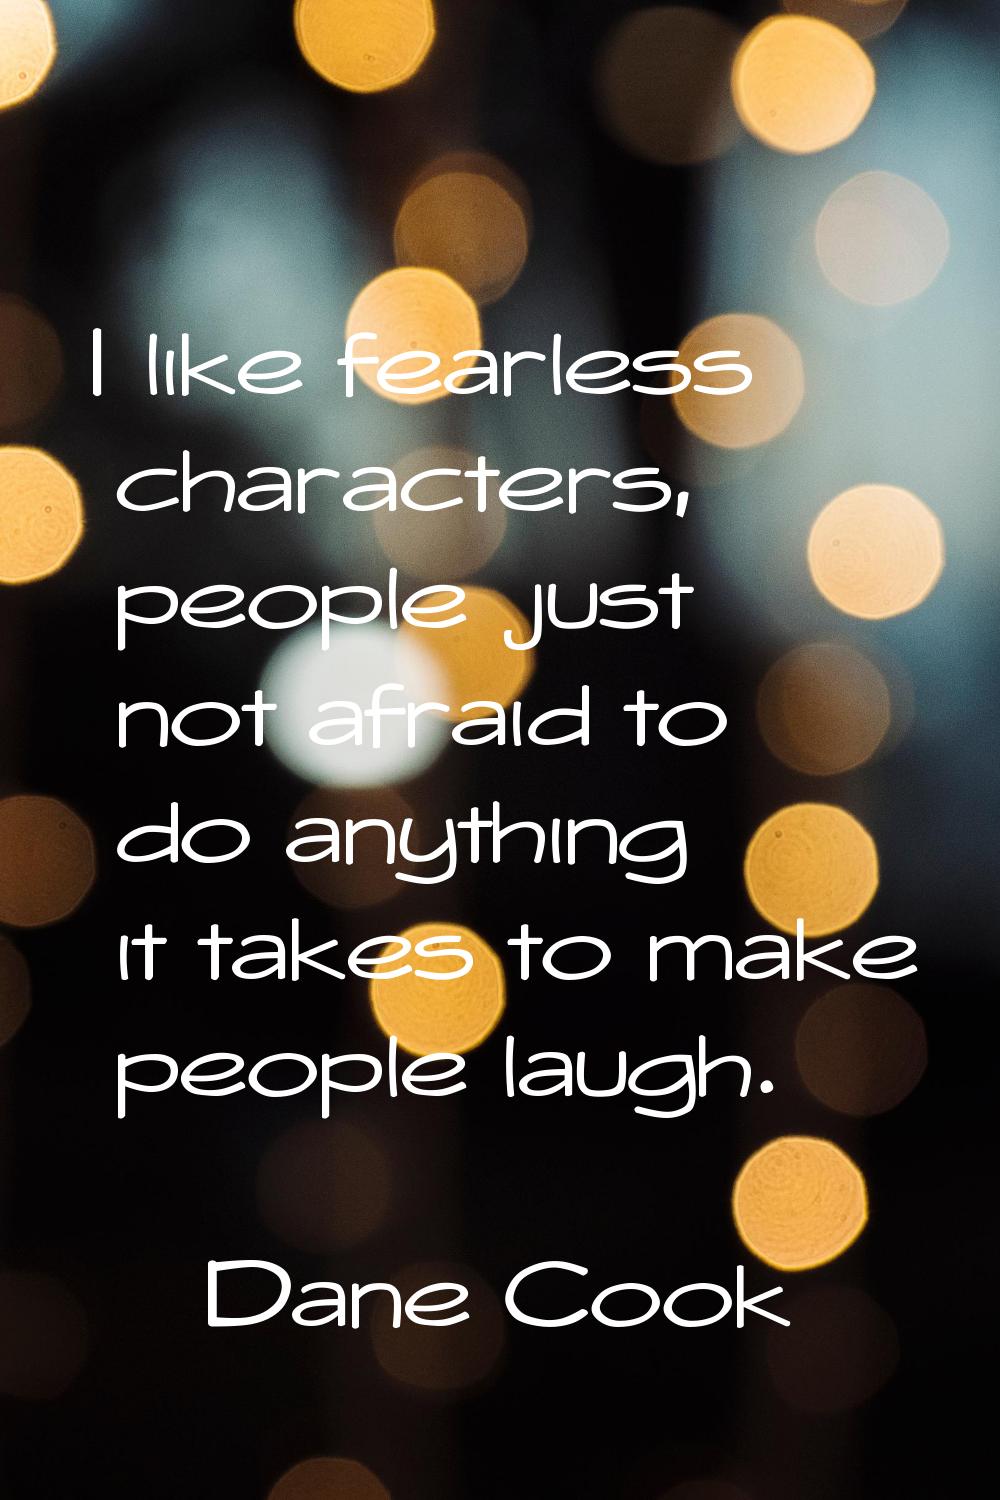 I like fearless characters, people just not afraid to do anything it takes to make people laugh.